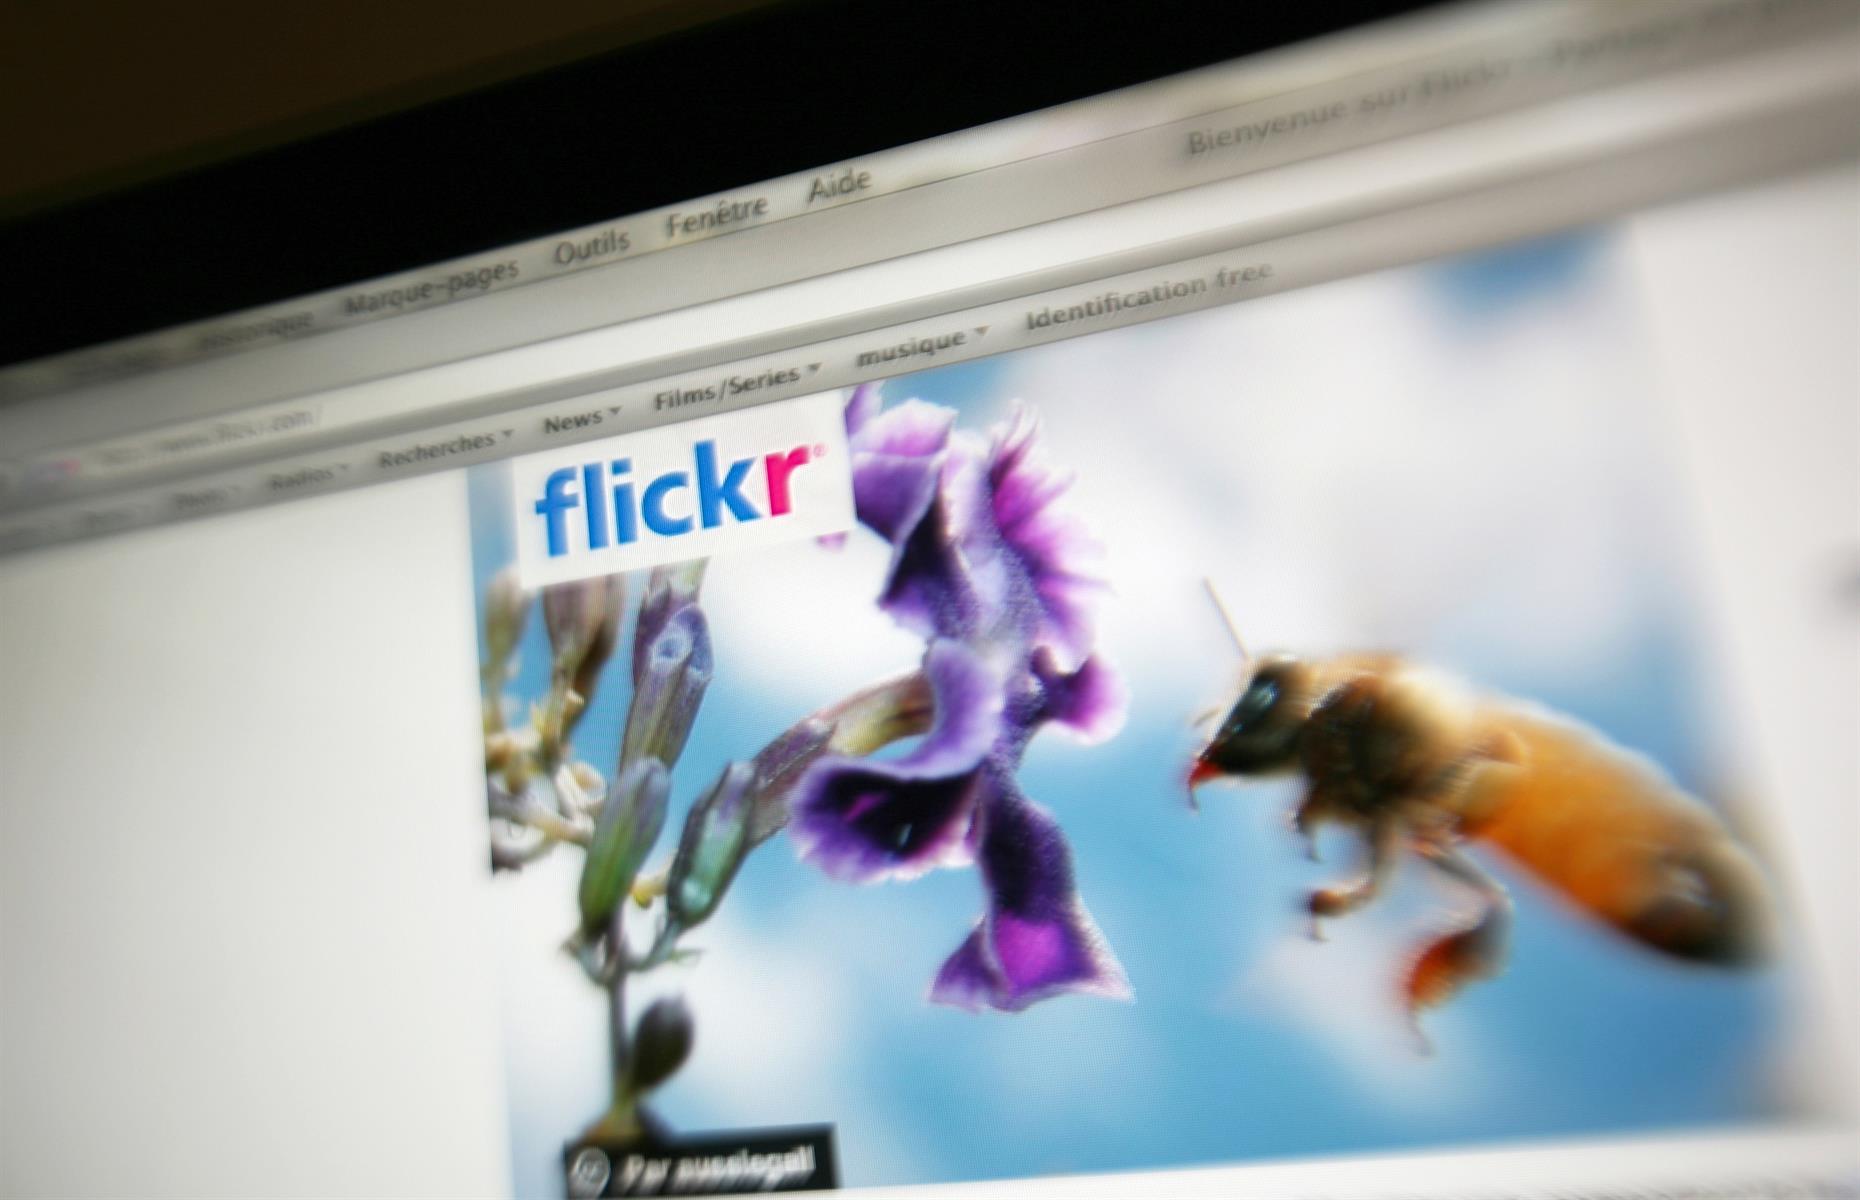 The birth of Flickr